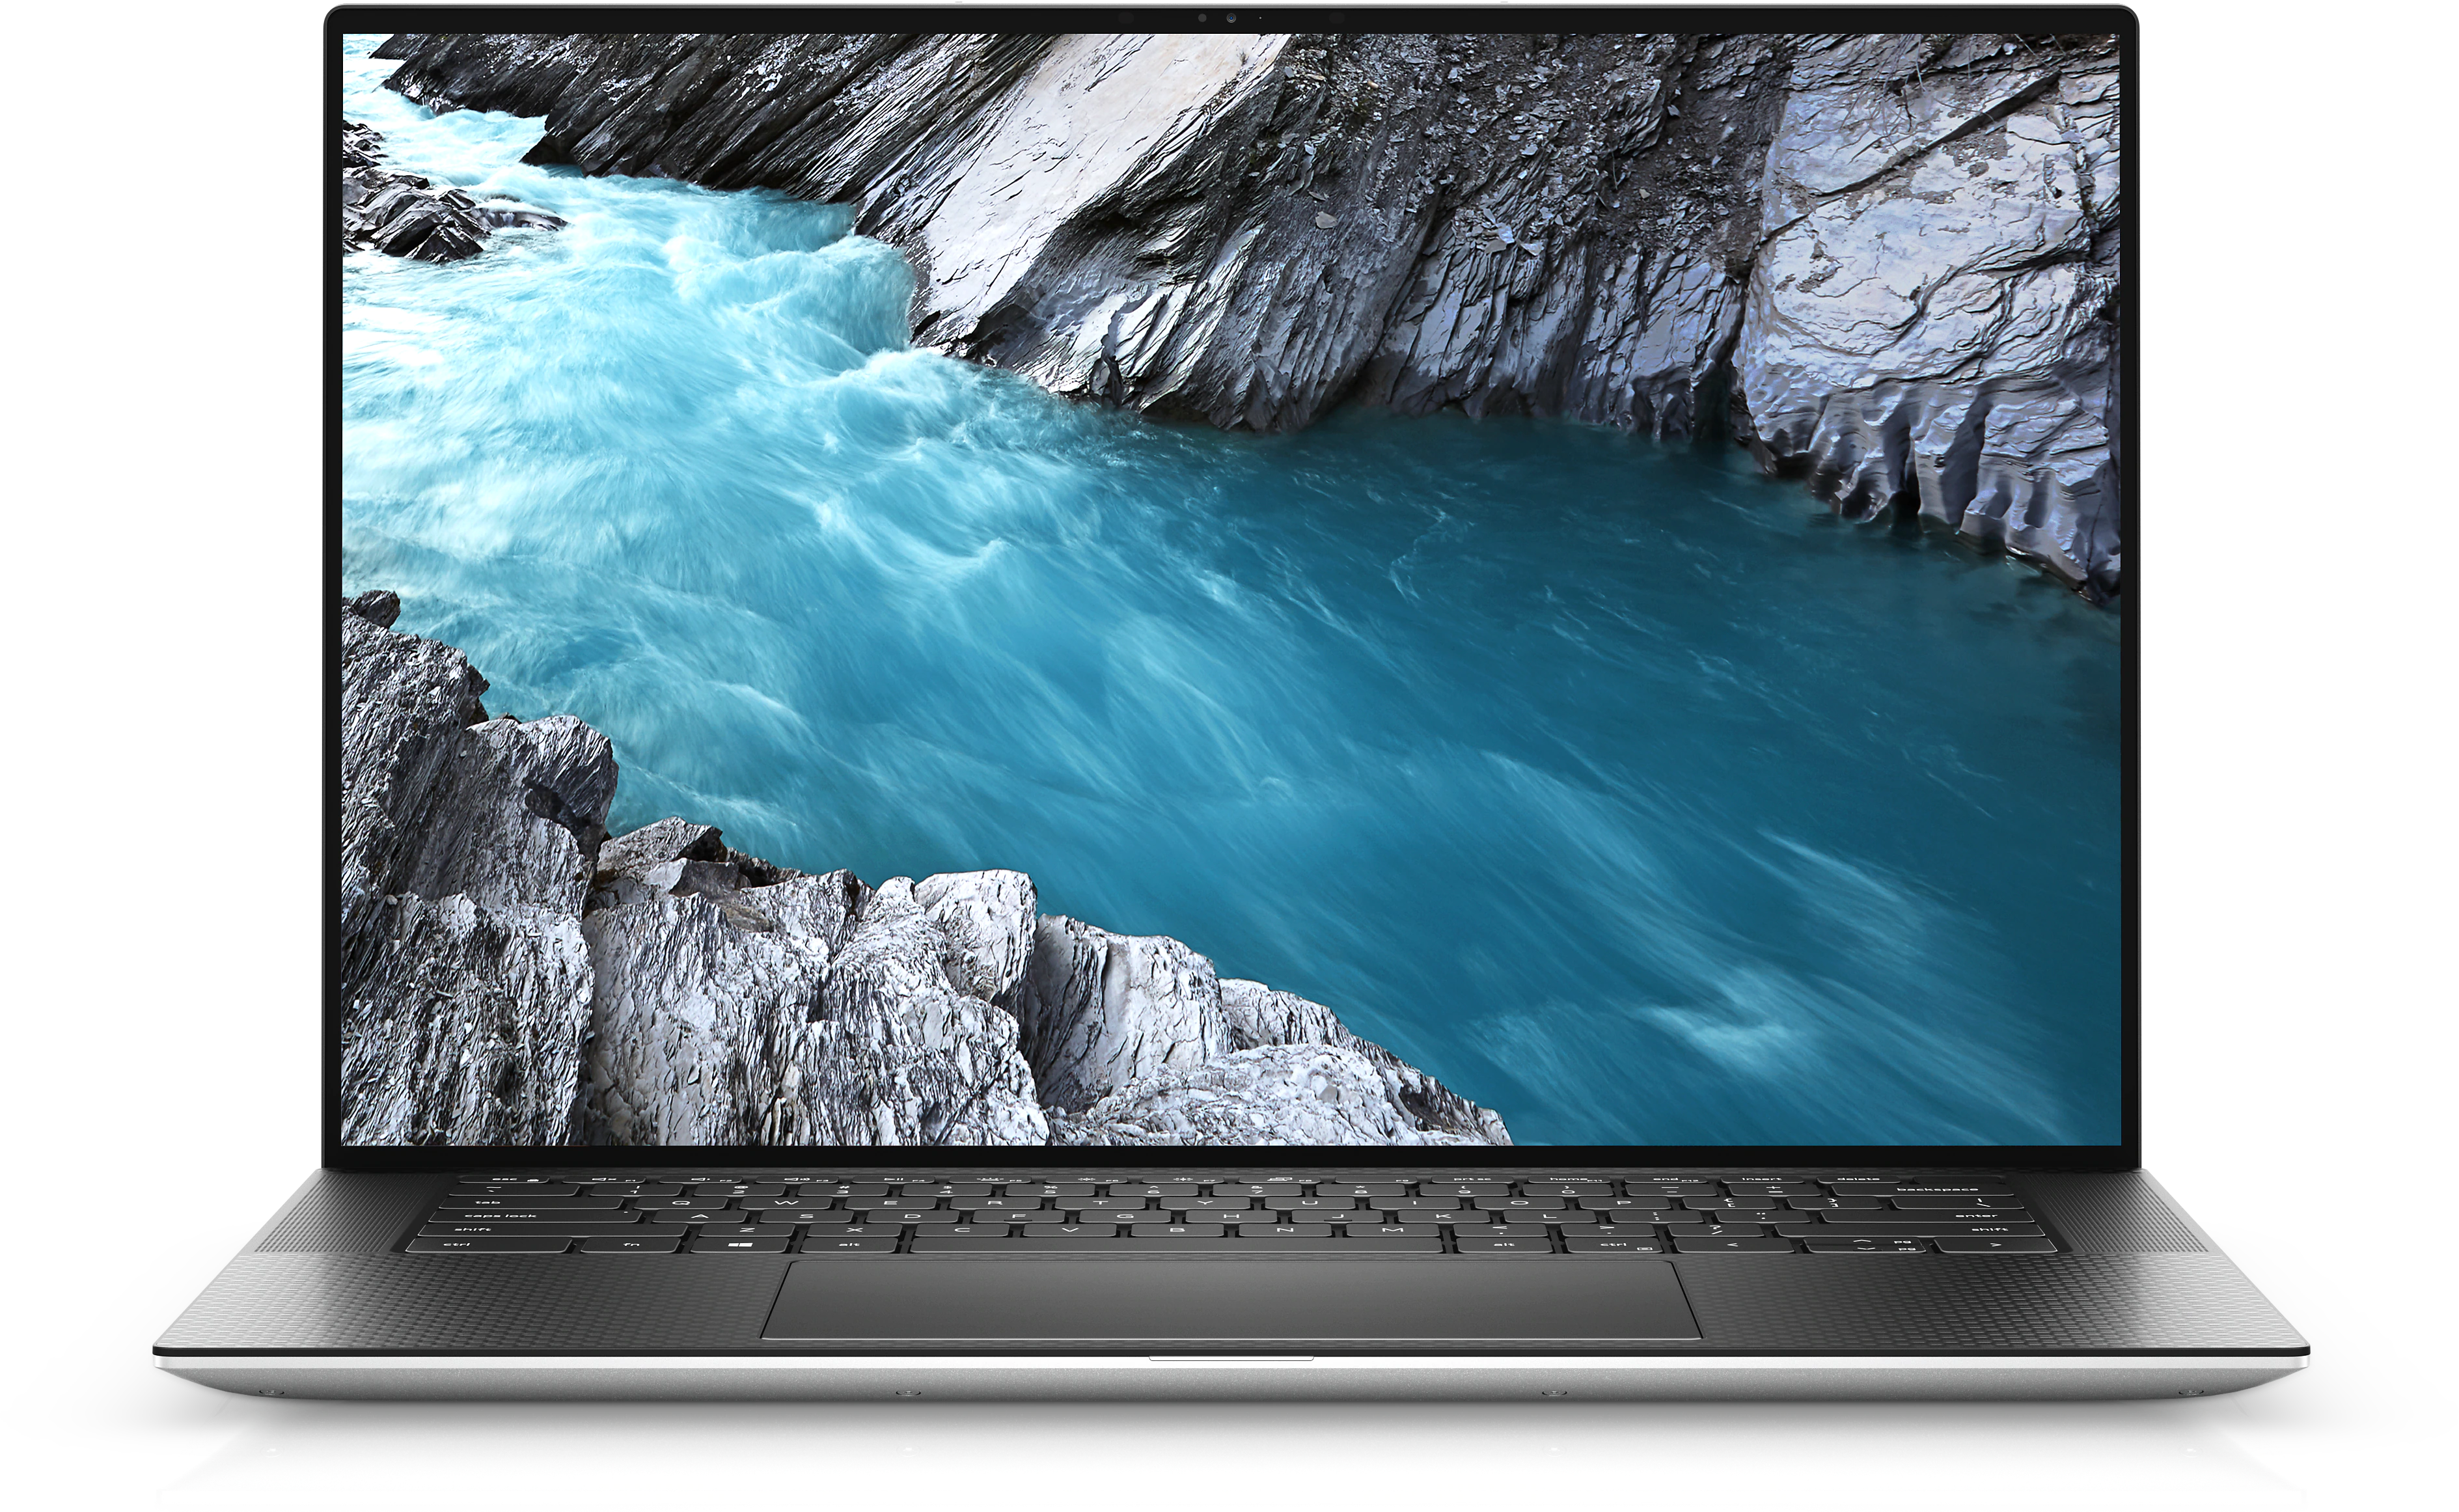 Best windows laptop for medical coding Dell XPS 15